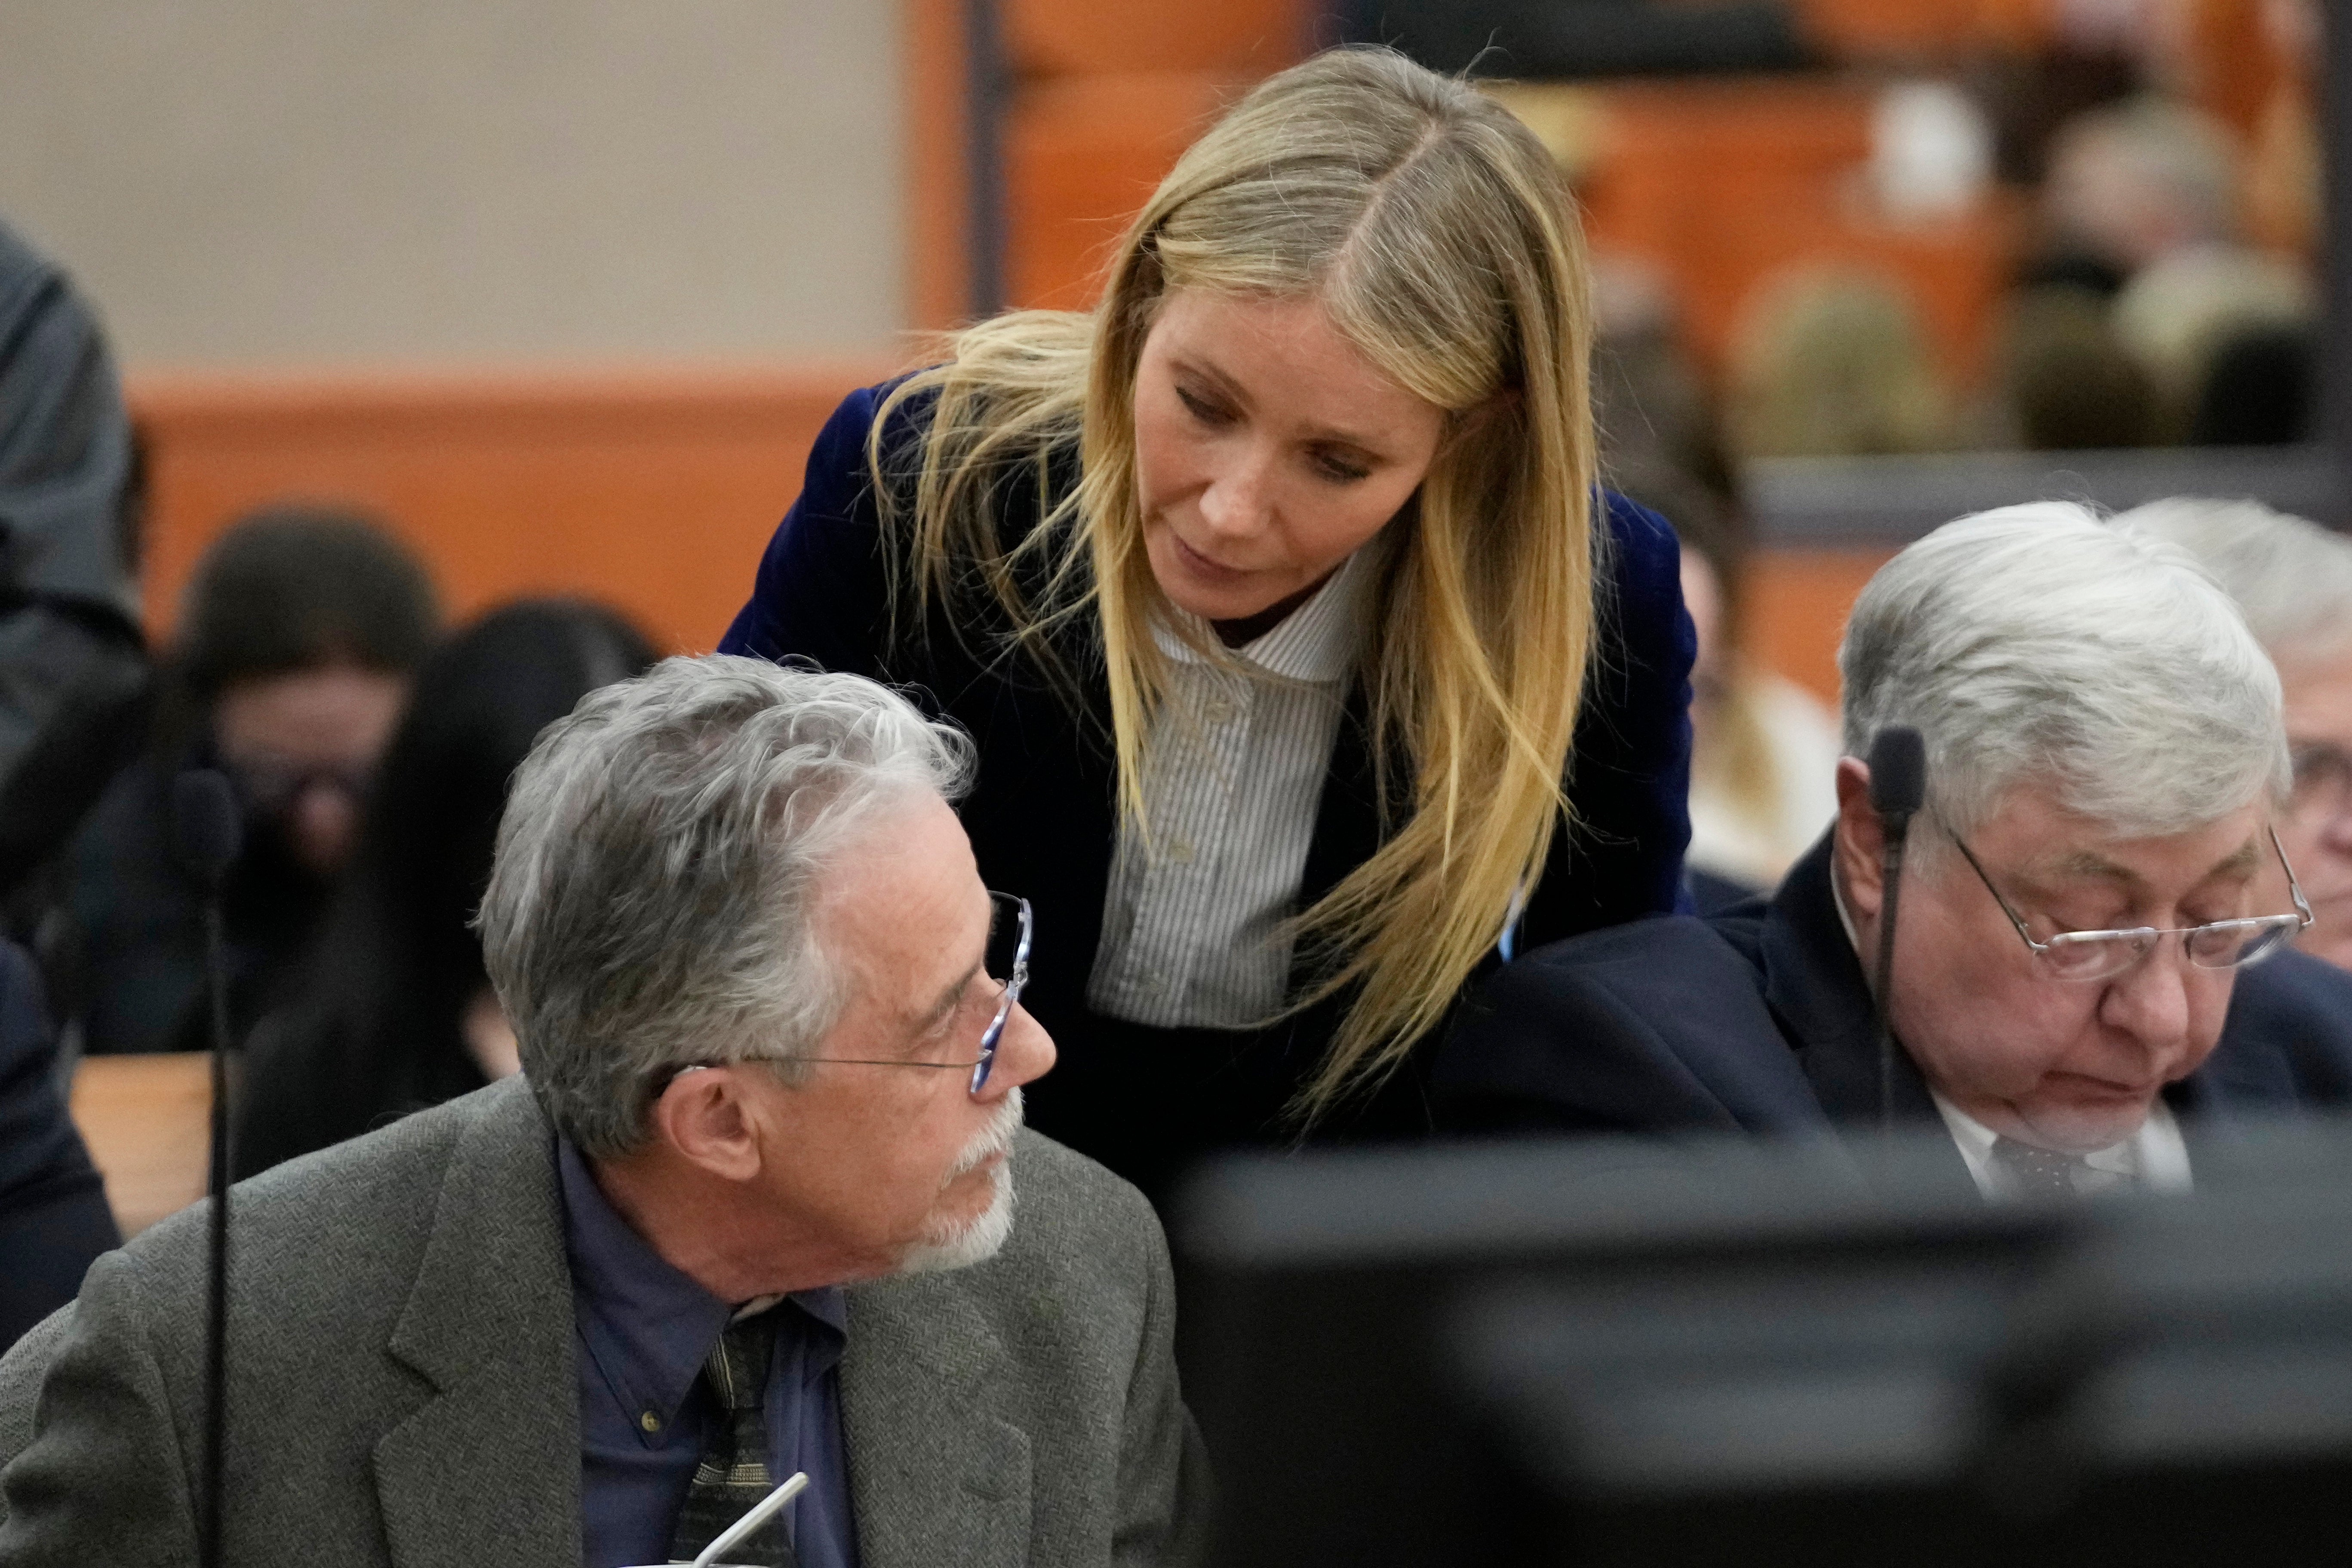 Paltrow whispers ‘I wish you well’ to her courtroom opponent after winning the case